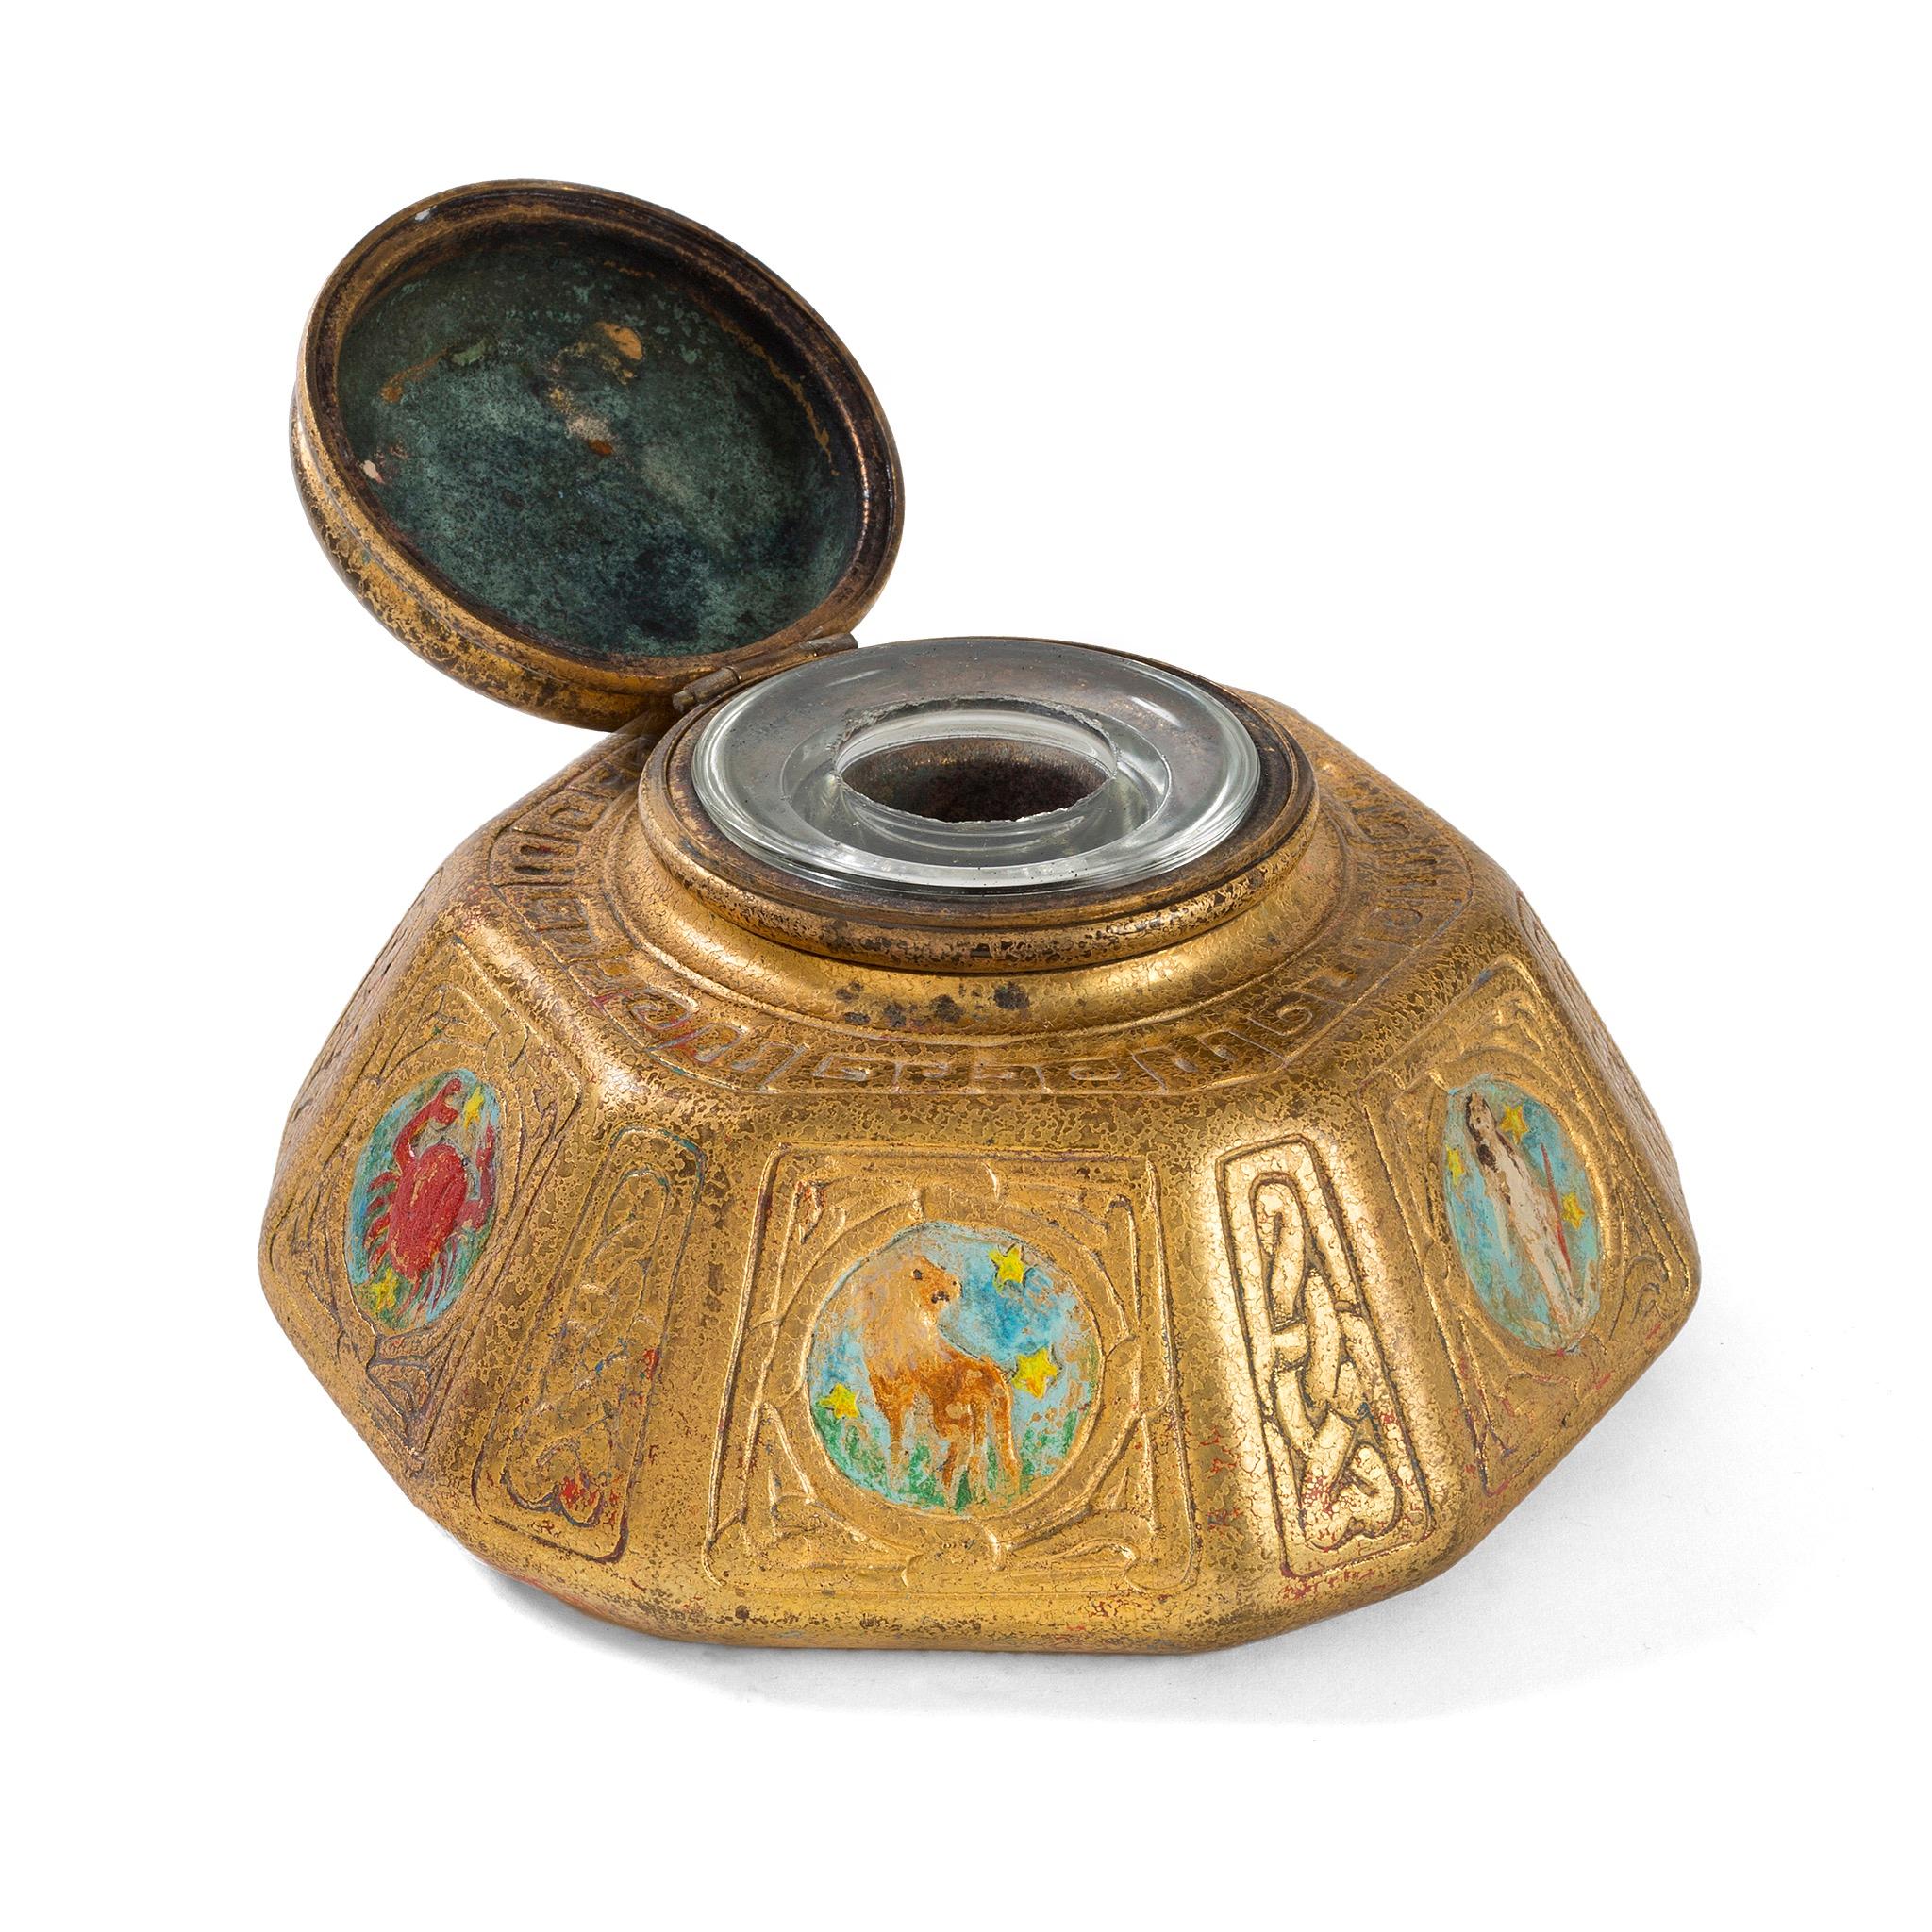 A gilt bronze “Zodiac” inkwell by Tiffany Studios New York. The inkwell features intricate pseudo-Celtic patterning interspersed with circular elements in sky blue, each of which features a stylized depiction of one of the 12 signs of the Zodiac,